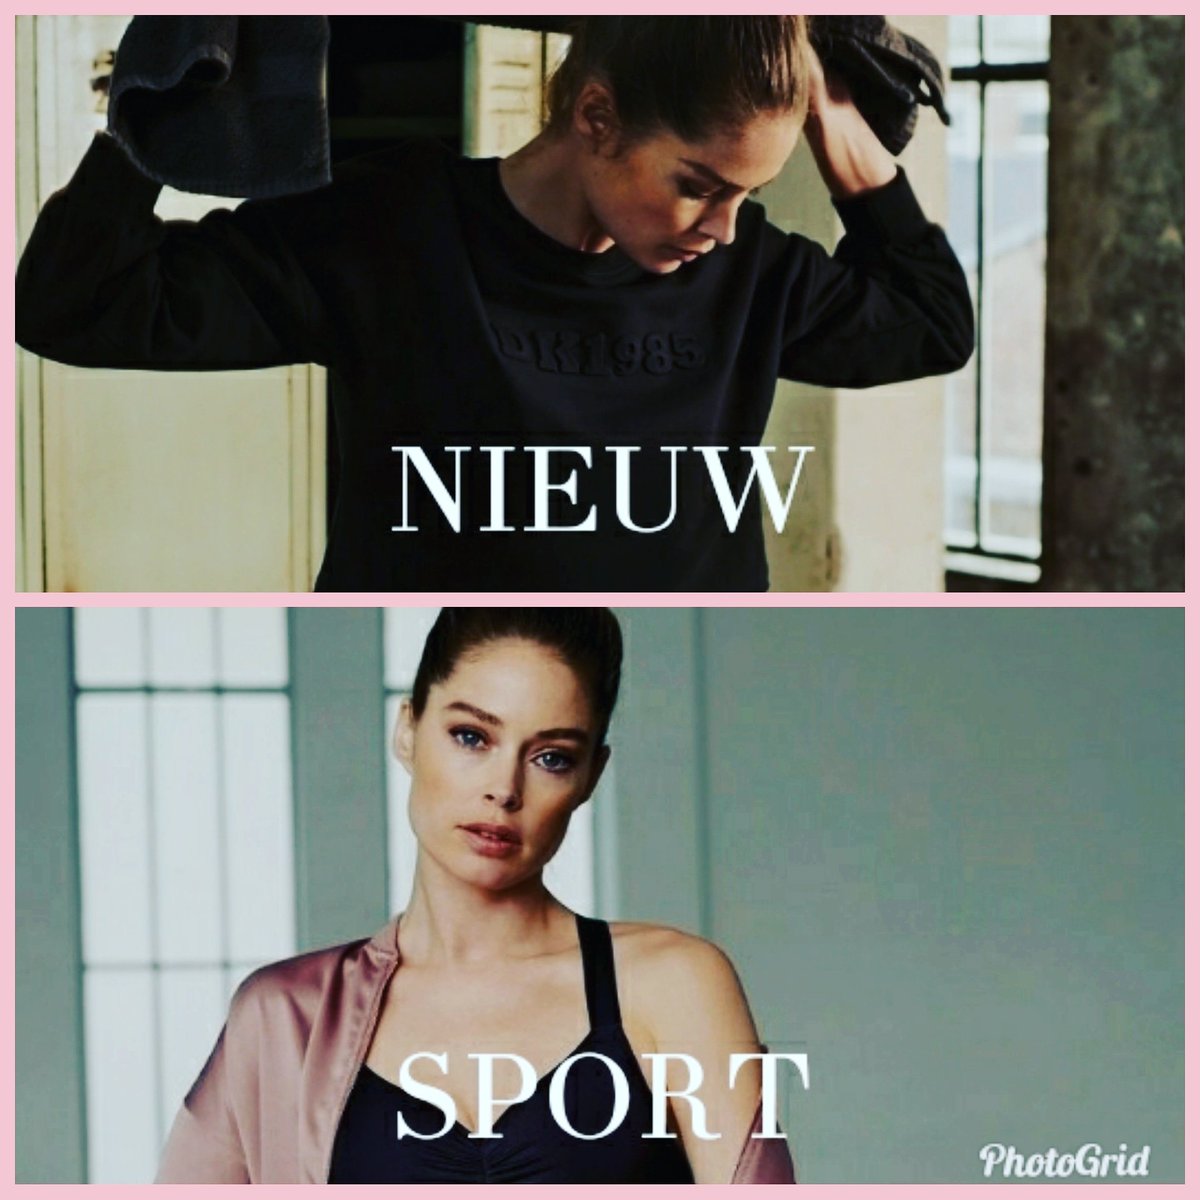 Got up early this morning cause it's finally available online: the Doutzen's sportscollection! 🐦😱😍 This time she got inspired by dancing. So gracious... 💃💞🎀#hkmacademy #Hunkemöller #doutzenstories #newcollection #newarivals #doutzensport #doutzensportstories #fitandvital